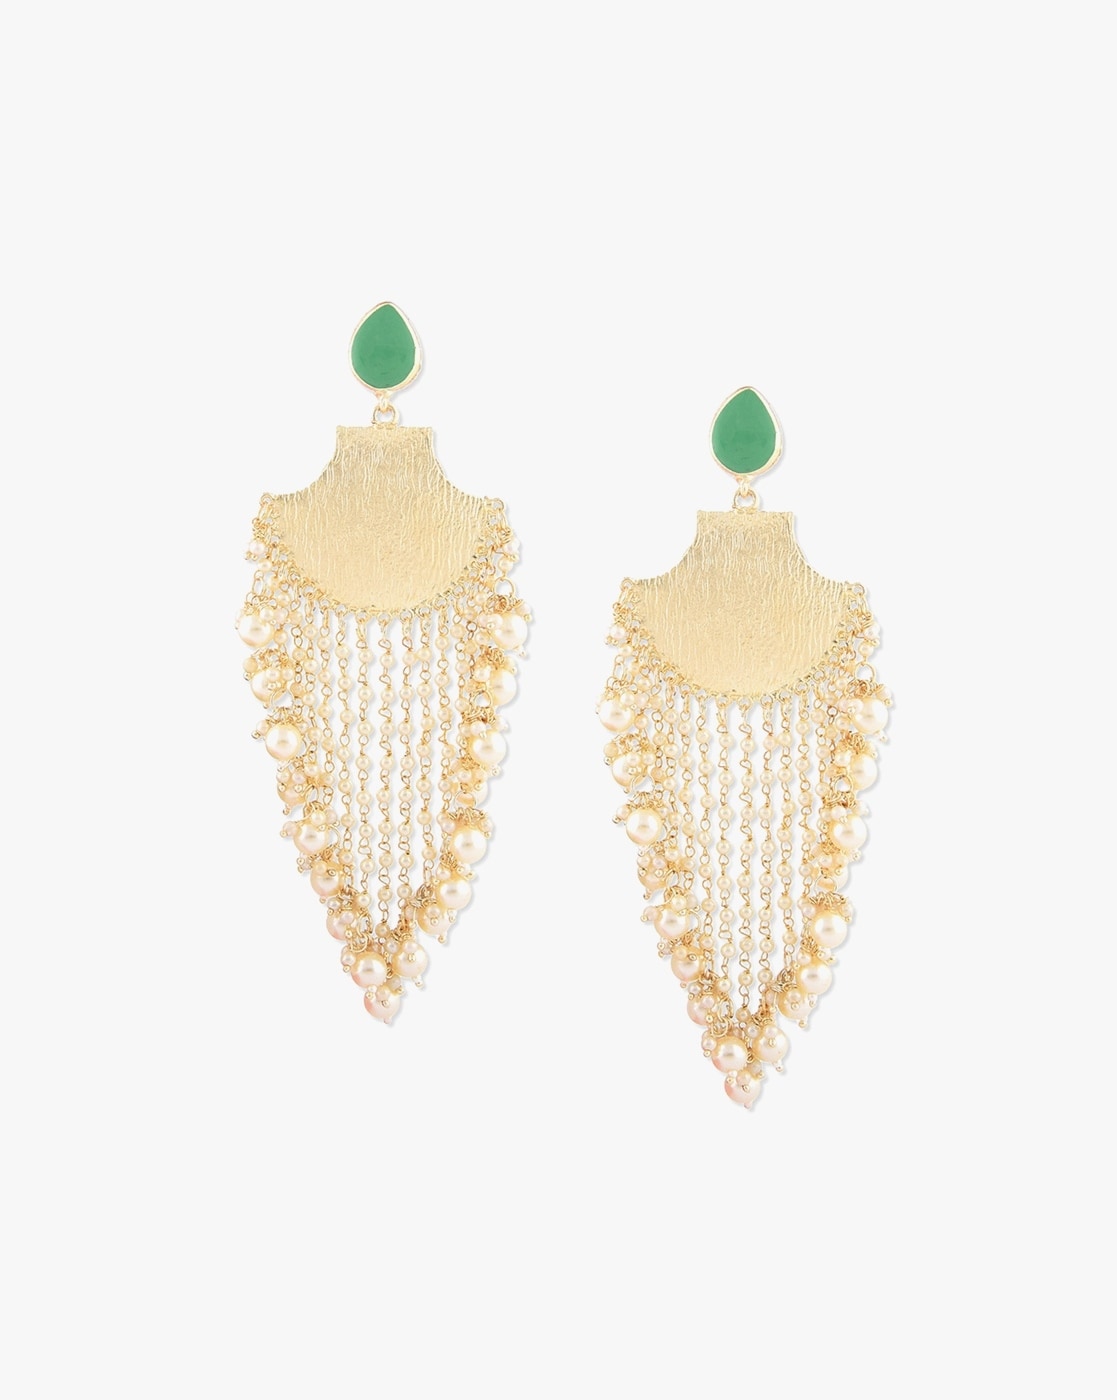 Delicate Pearl Pendant Zaveri Pearls Earrings Wholesale Fashion Jewelry For  Small Gifts From Paizhao, $20.47 | DHgate.Com